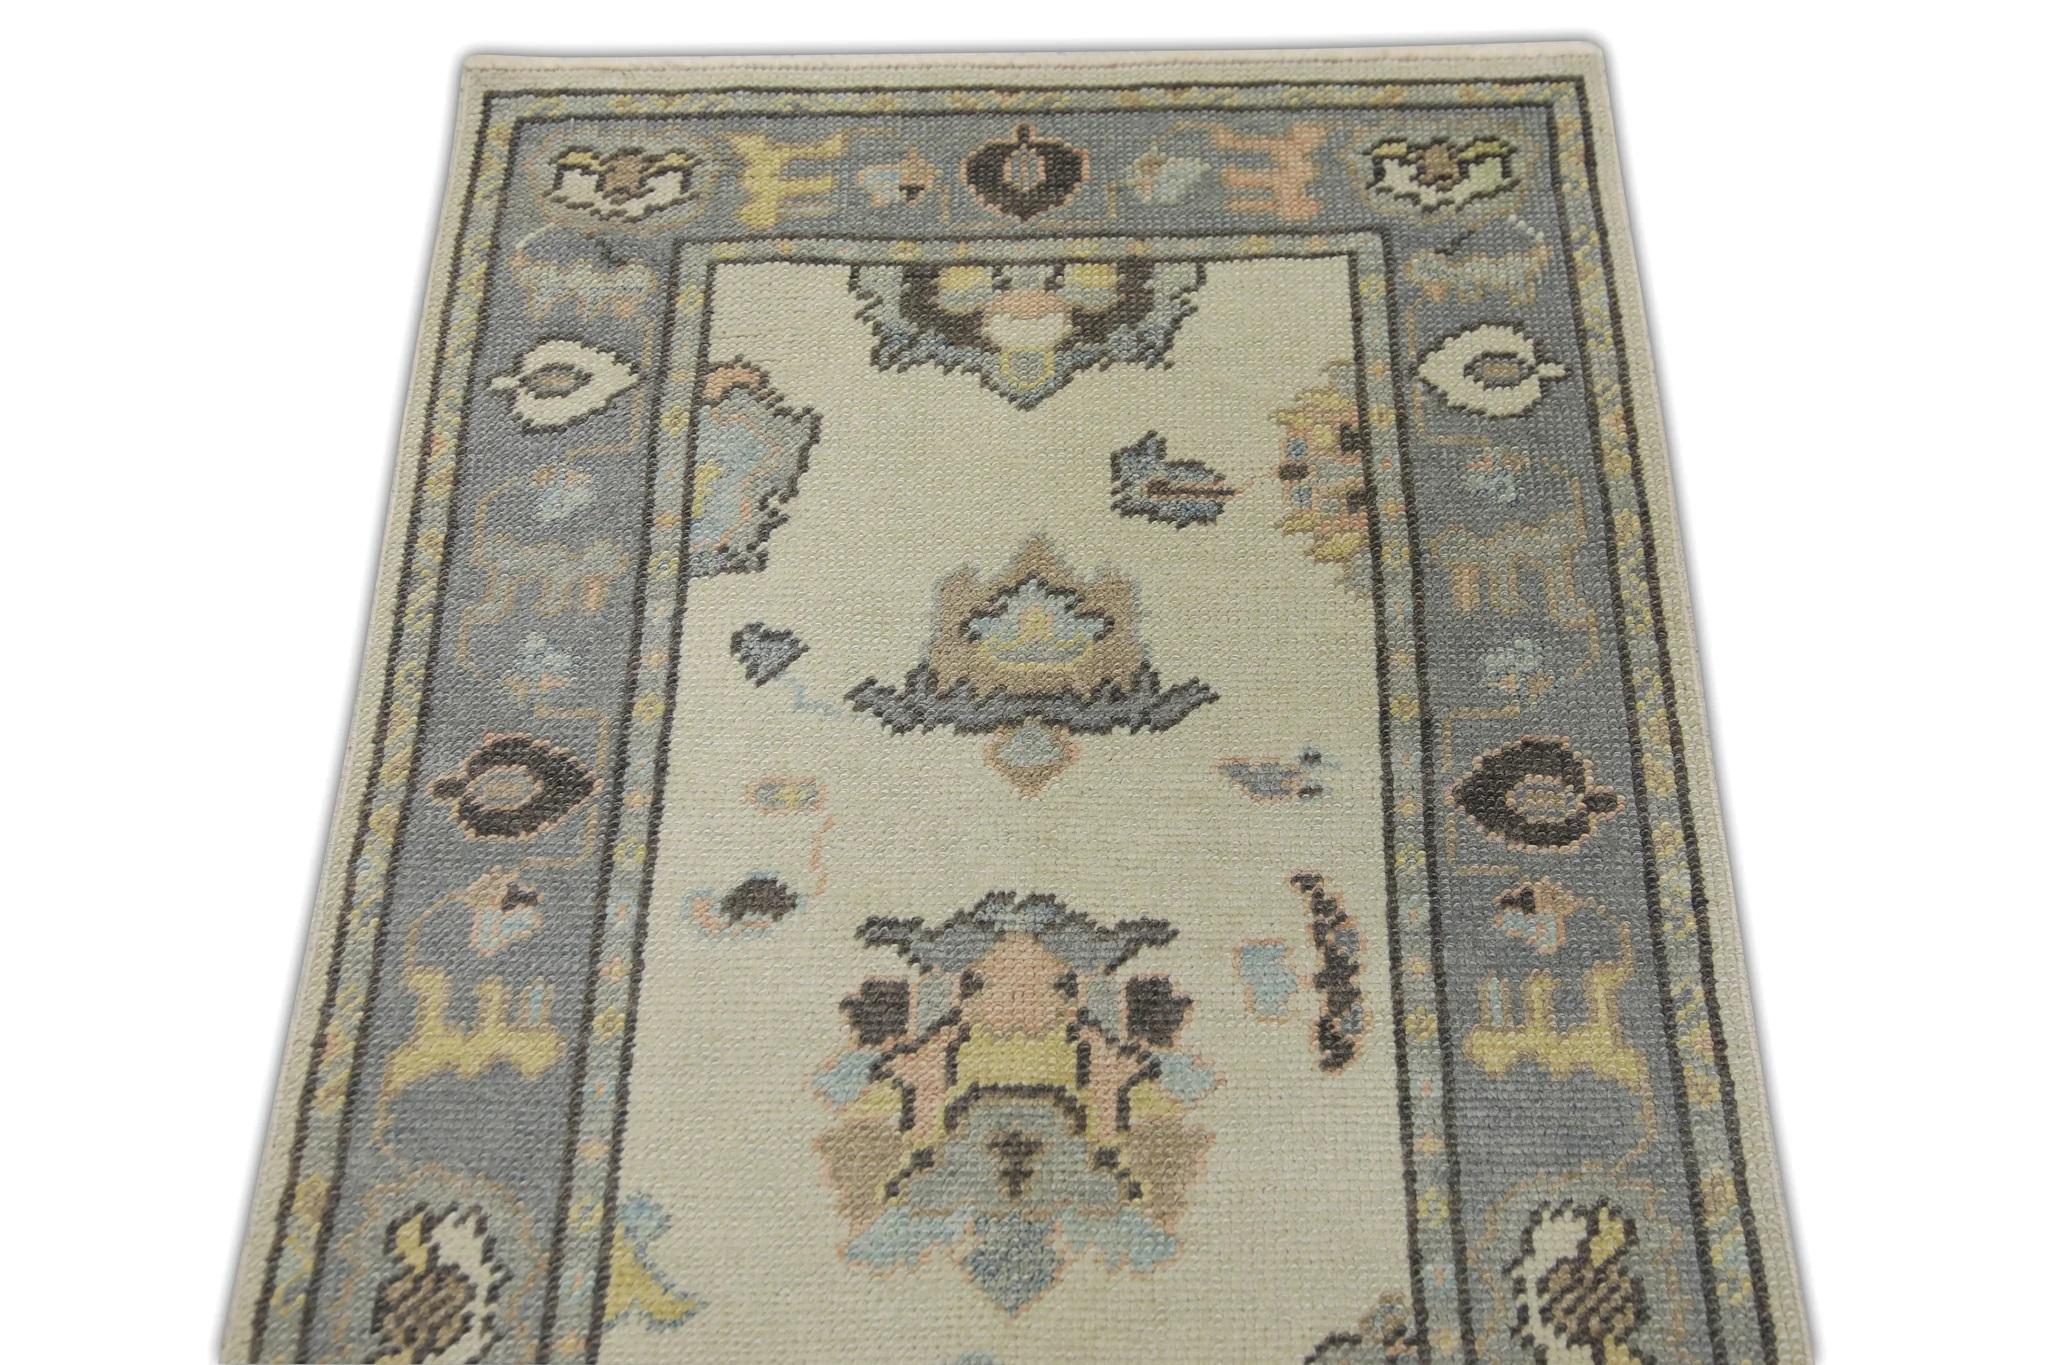 Vegetable Dyed Cream Handwoven Wool Turkish Oushak Rug in Multicolor Floral Design 2'6